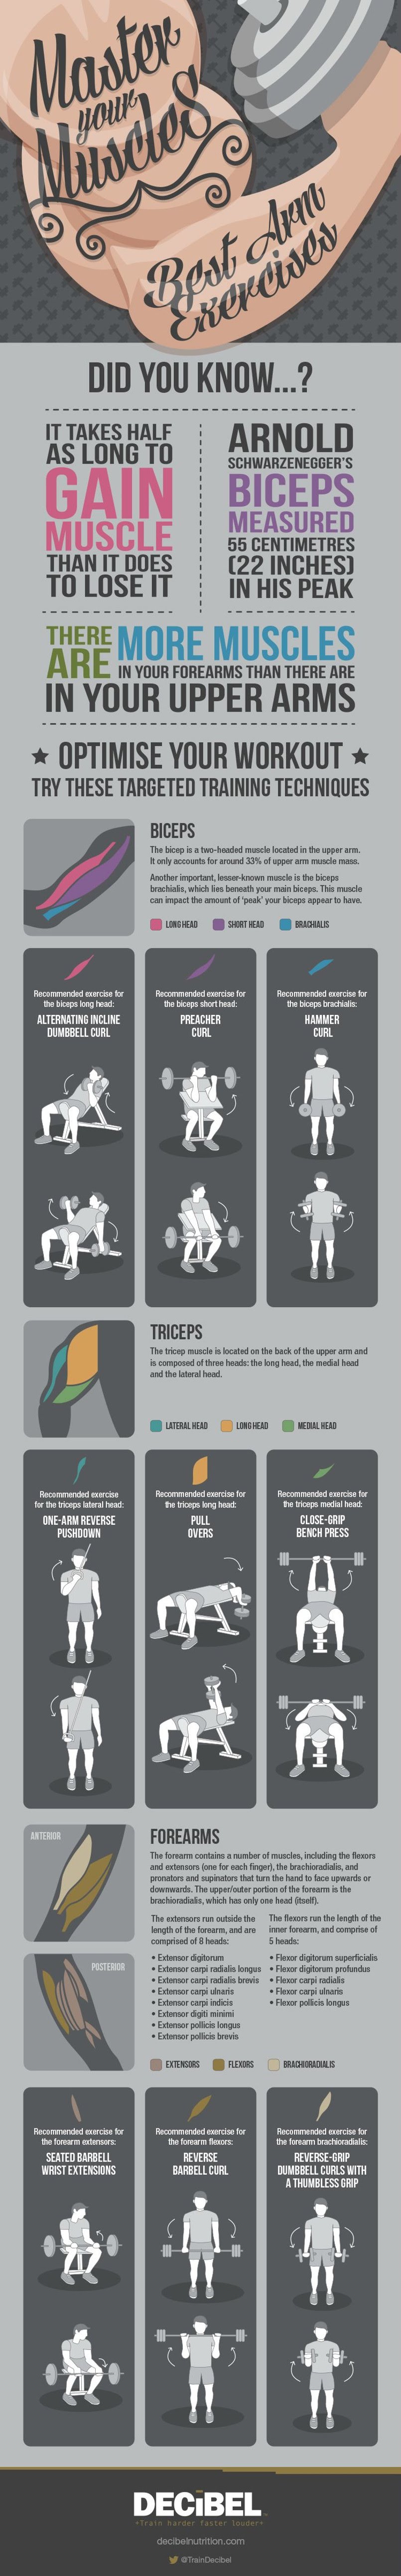 The Best Exercises To Master Your Arm Muscles #Infographic